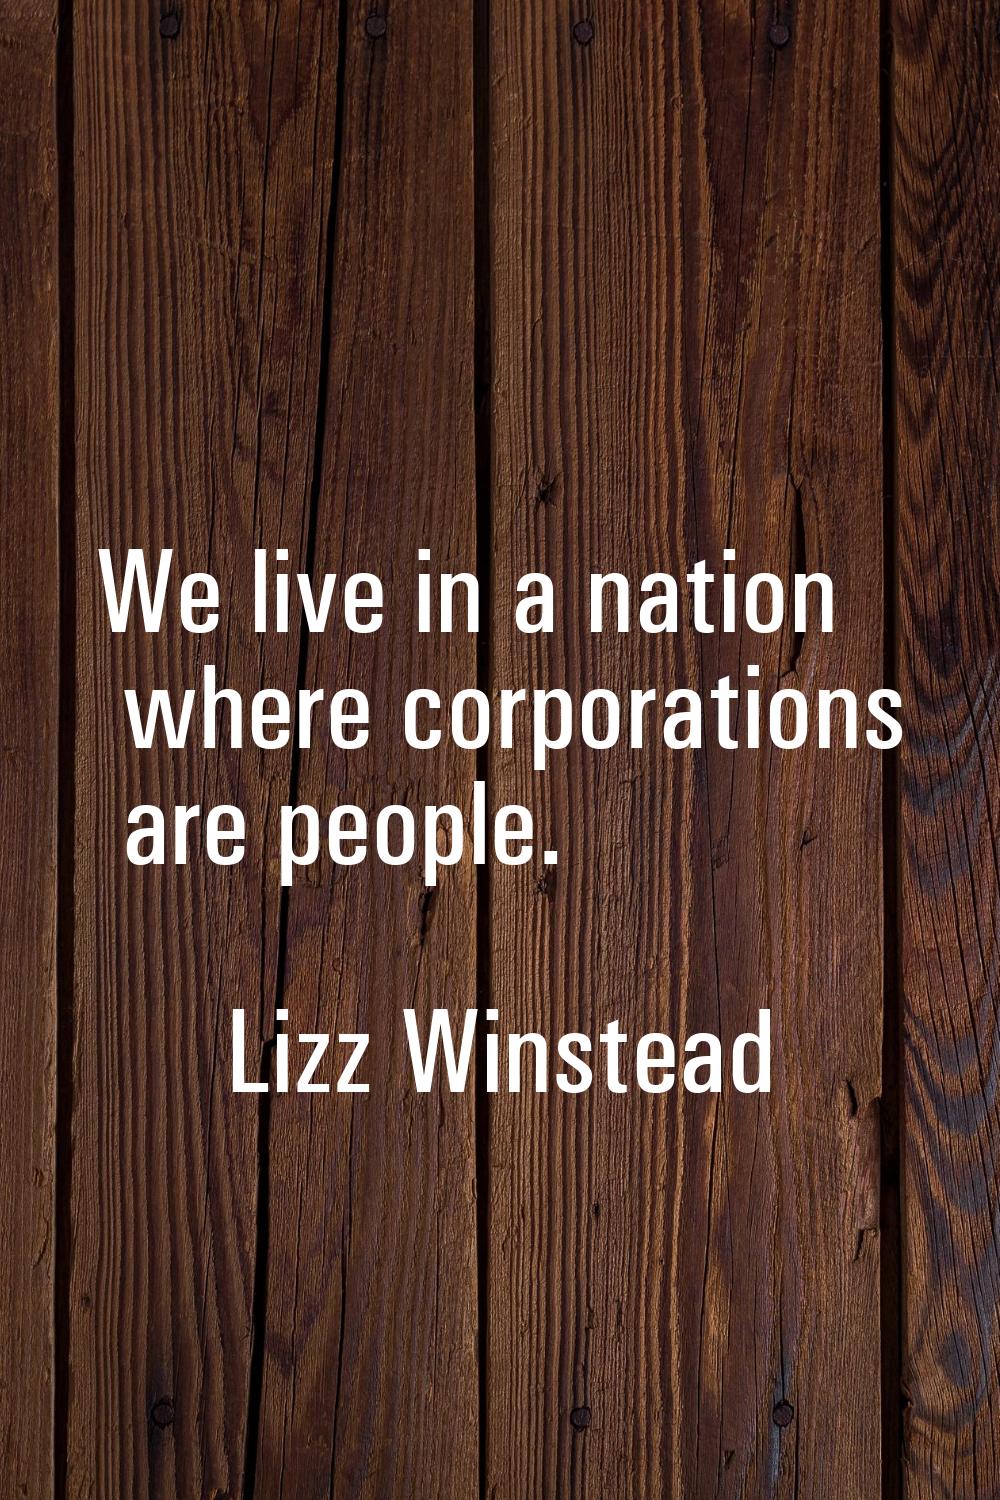 We live in a nation where corporations are people.